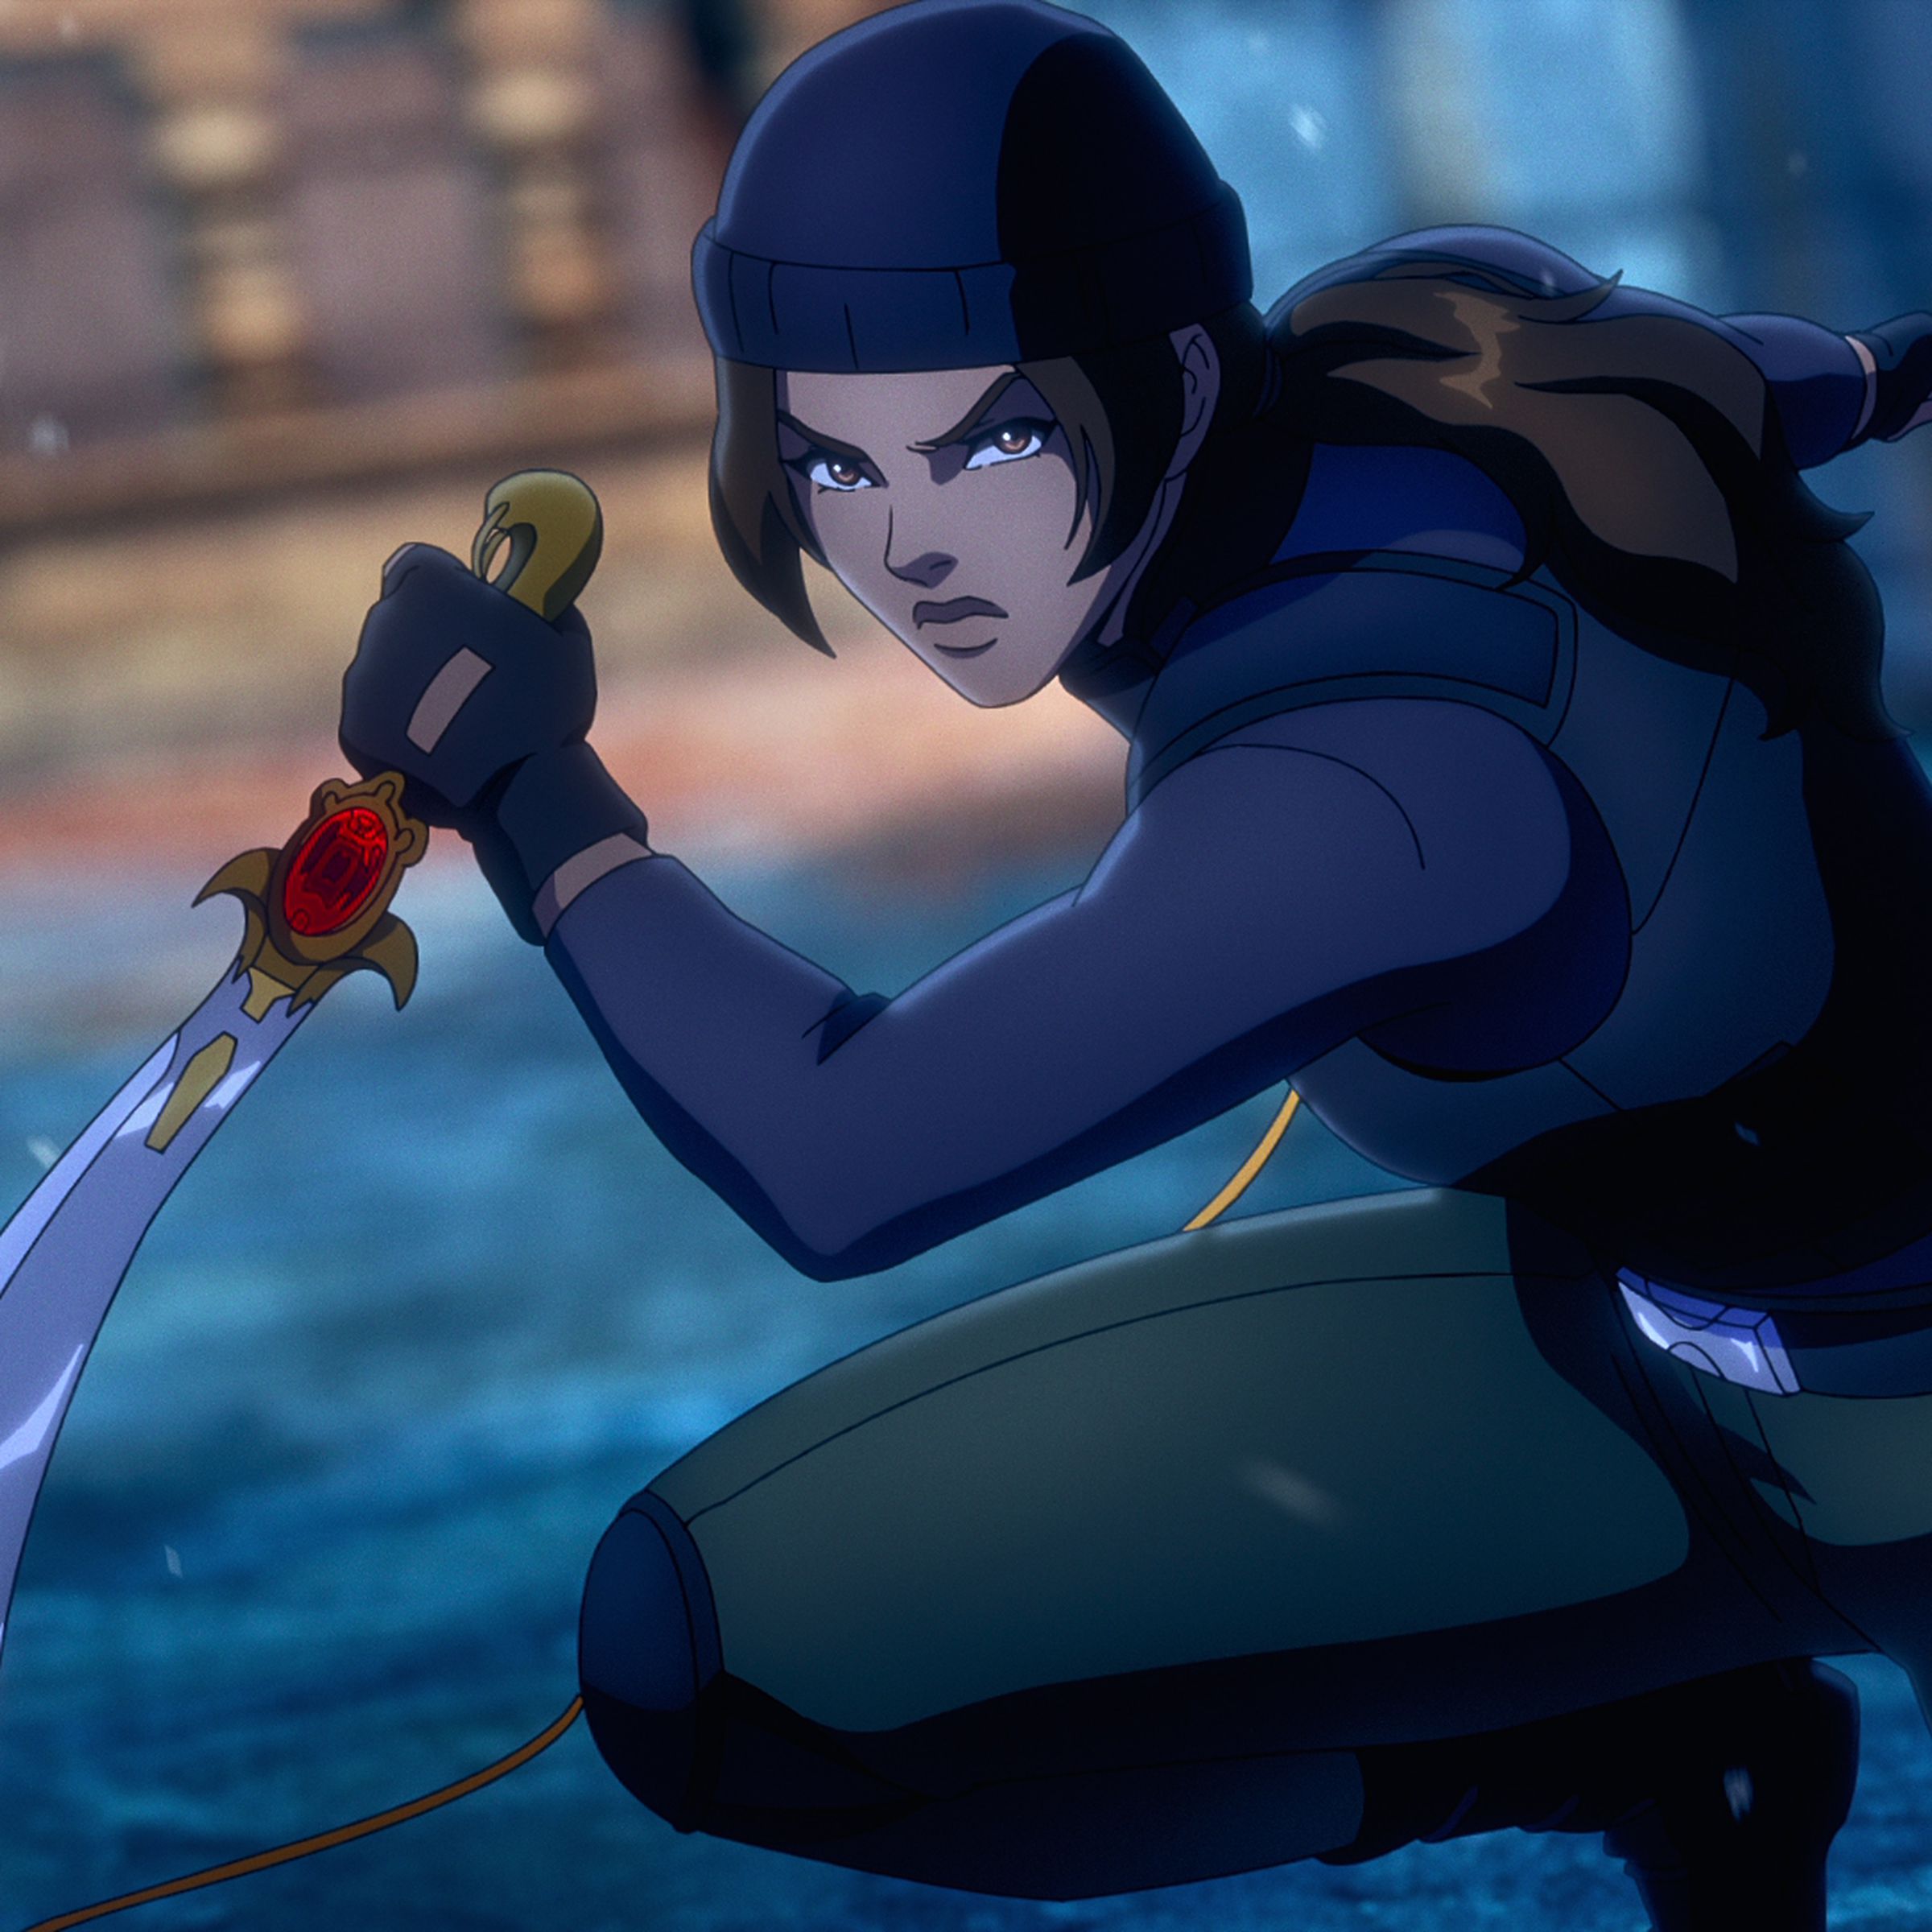 A still image from Netflix’s animated Tomb Raider show.